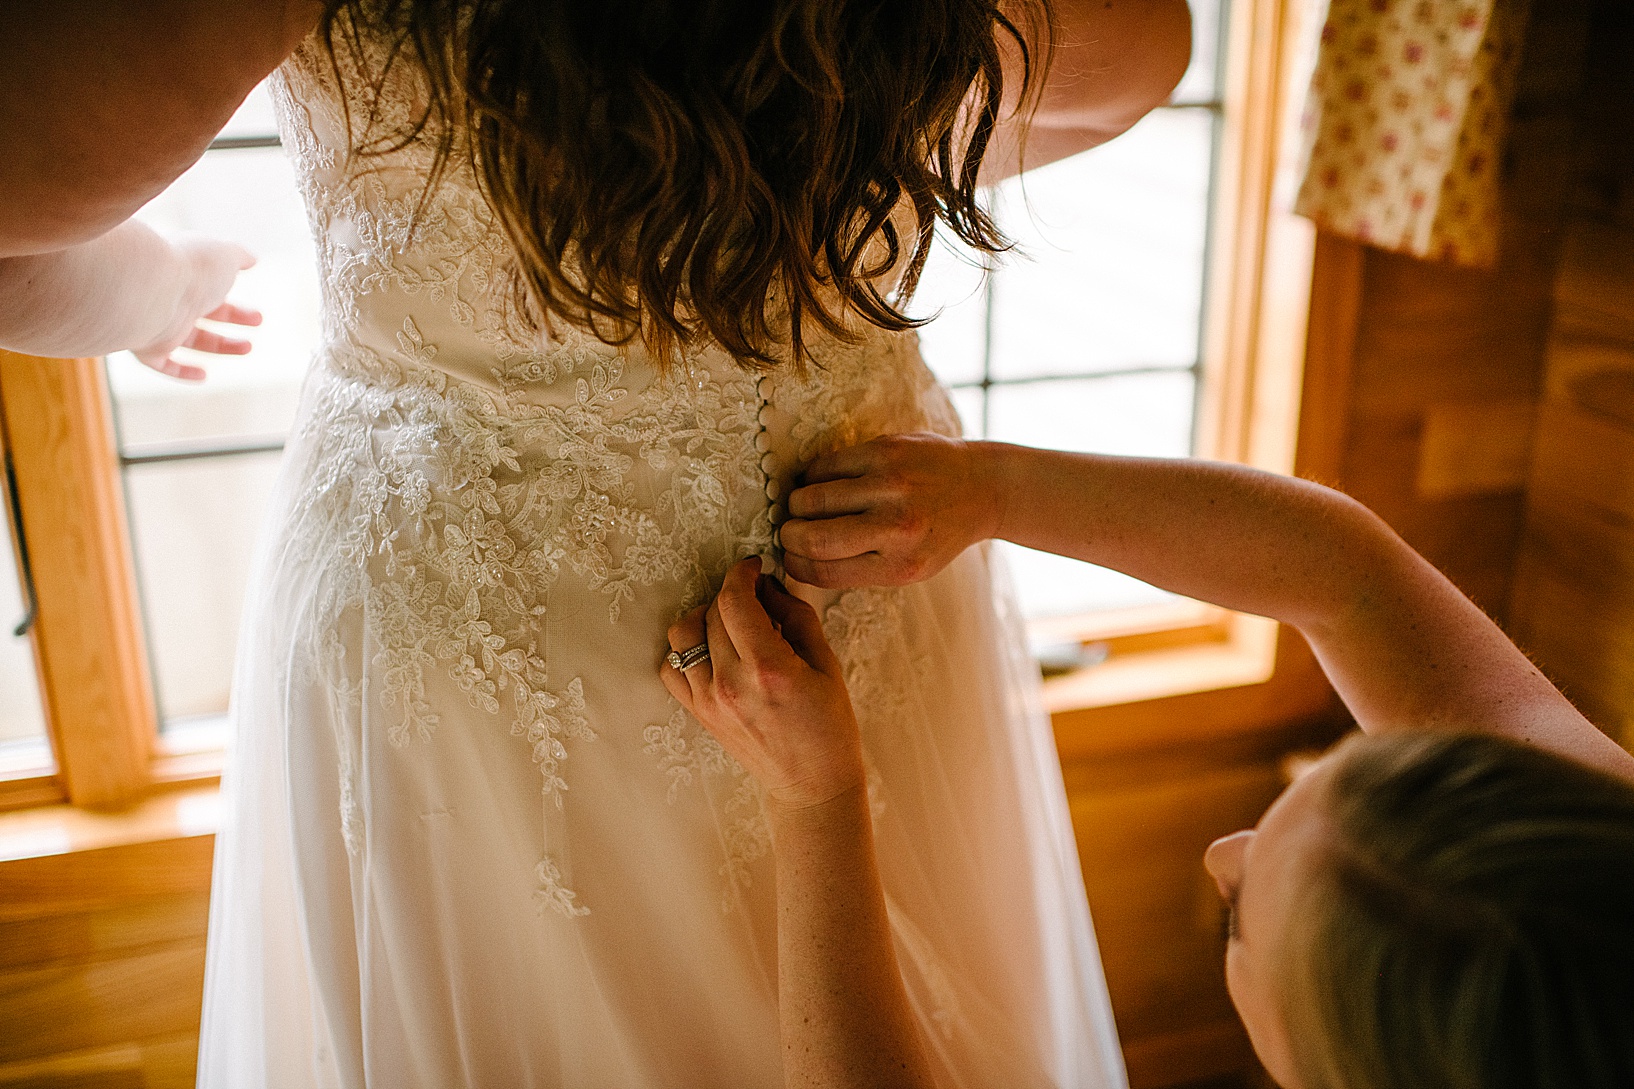 A bridesmaid helps the bride button up her wedding gown